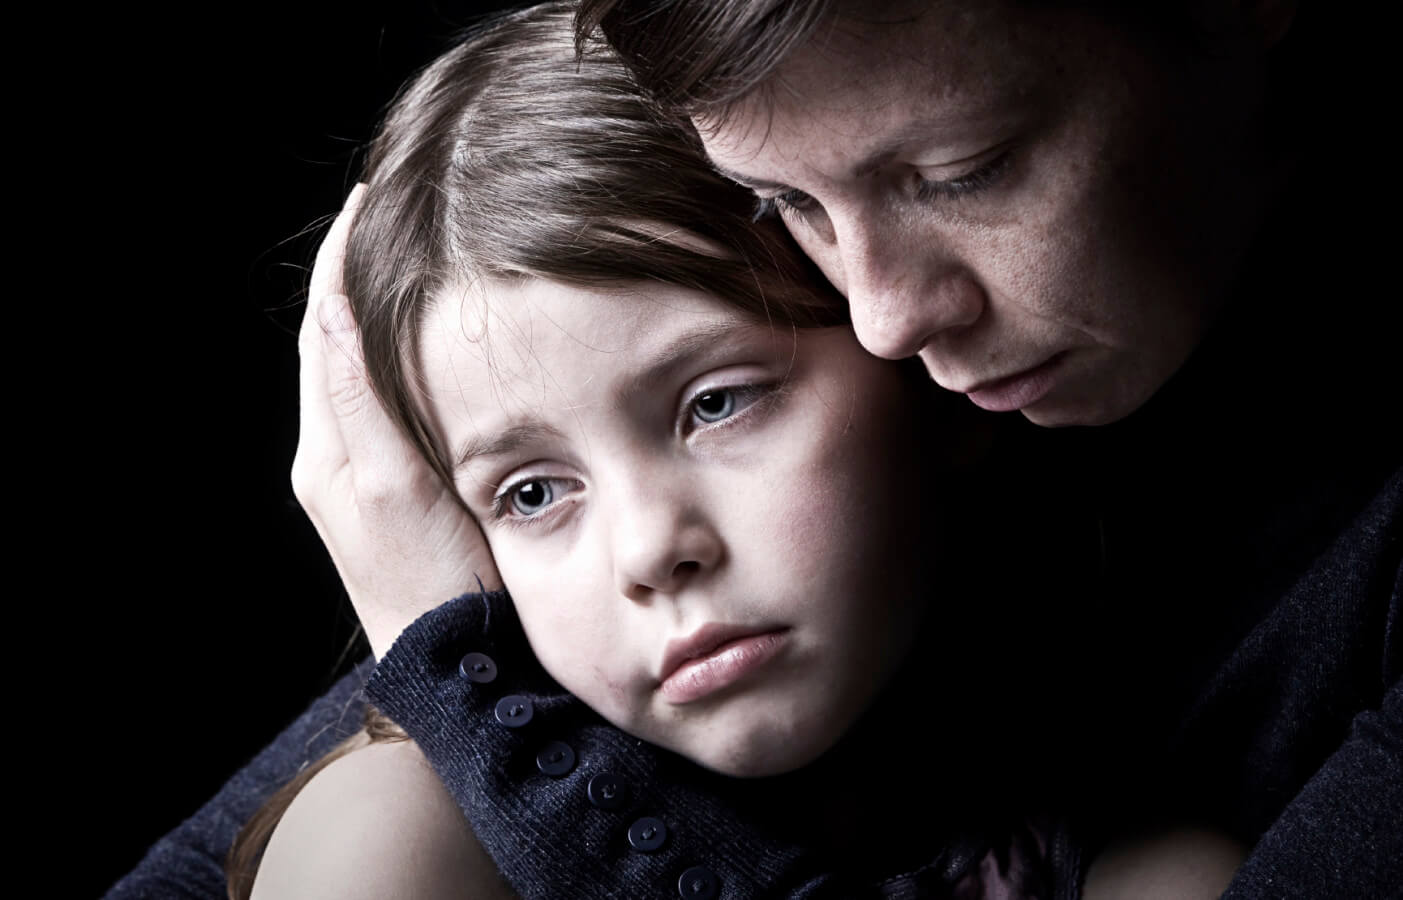 How Do I Care For A Young Person Whose Parent Committed Suicide?